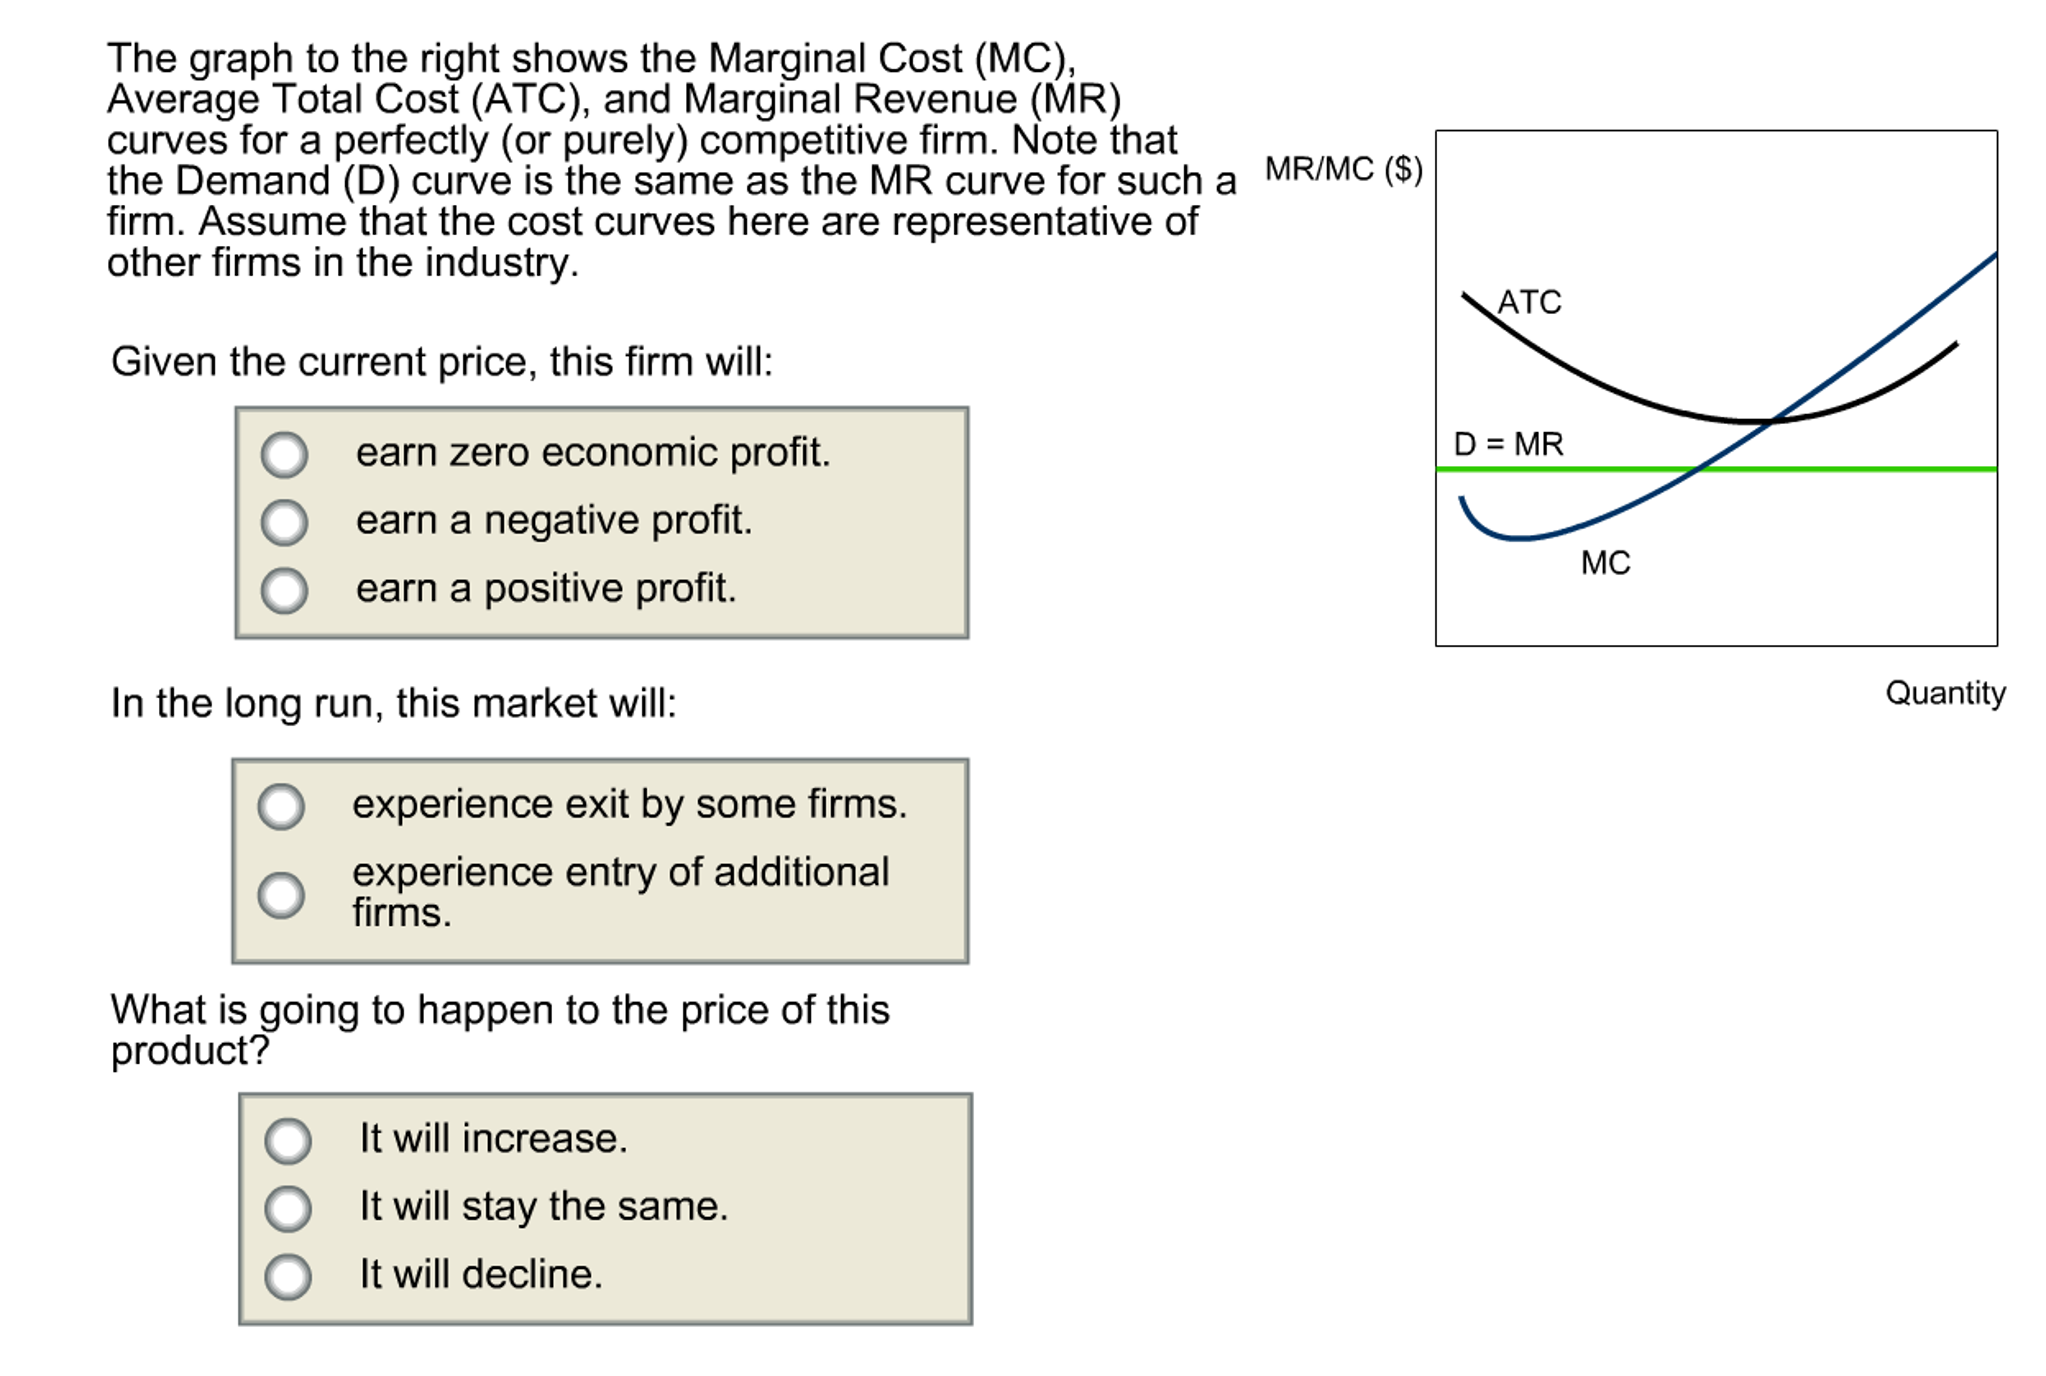 calculating marginal revenue product of the last worker